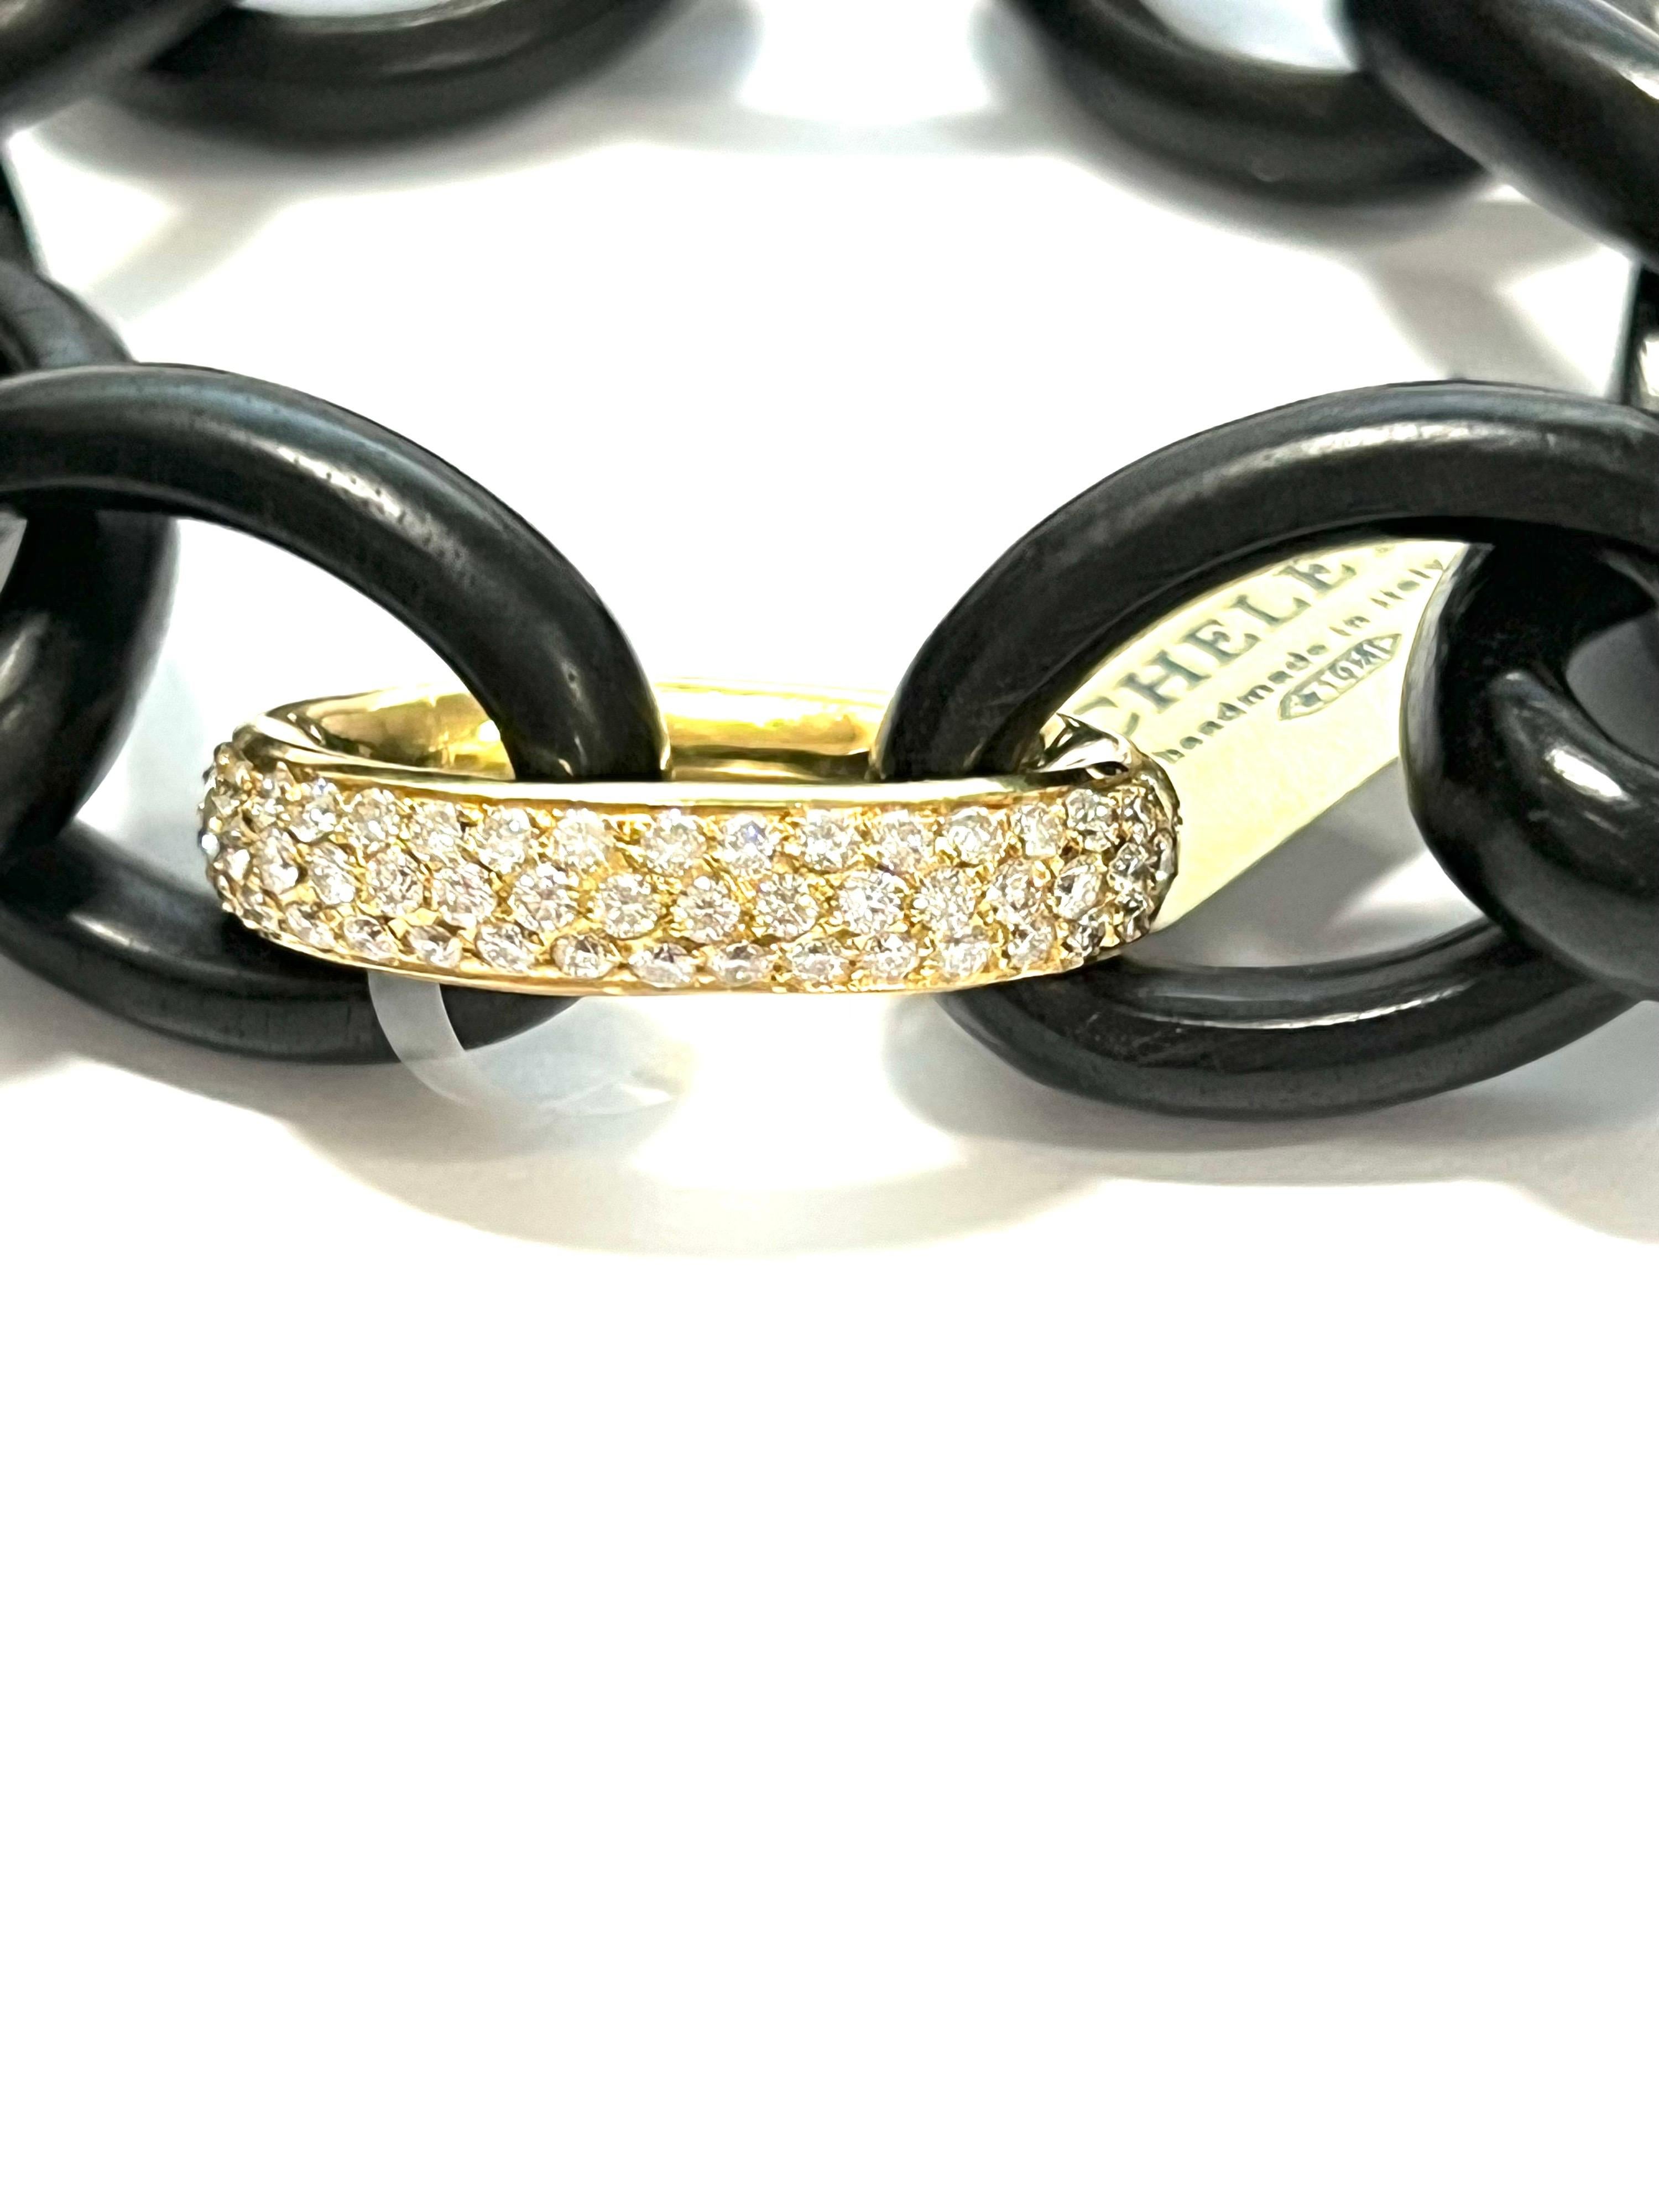 Bracelet In Ebony Links with 18k Yellow Gold and Diamond Clasp
Total weight gr. 19.2
Gold weight gr. 8
Diamonds GVVS Ct. 1.6